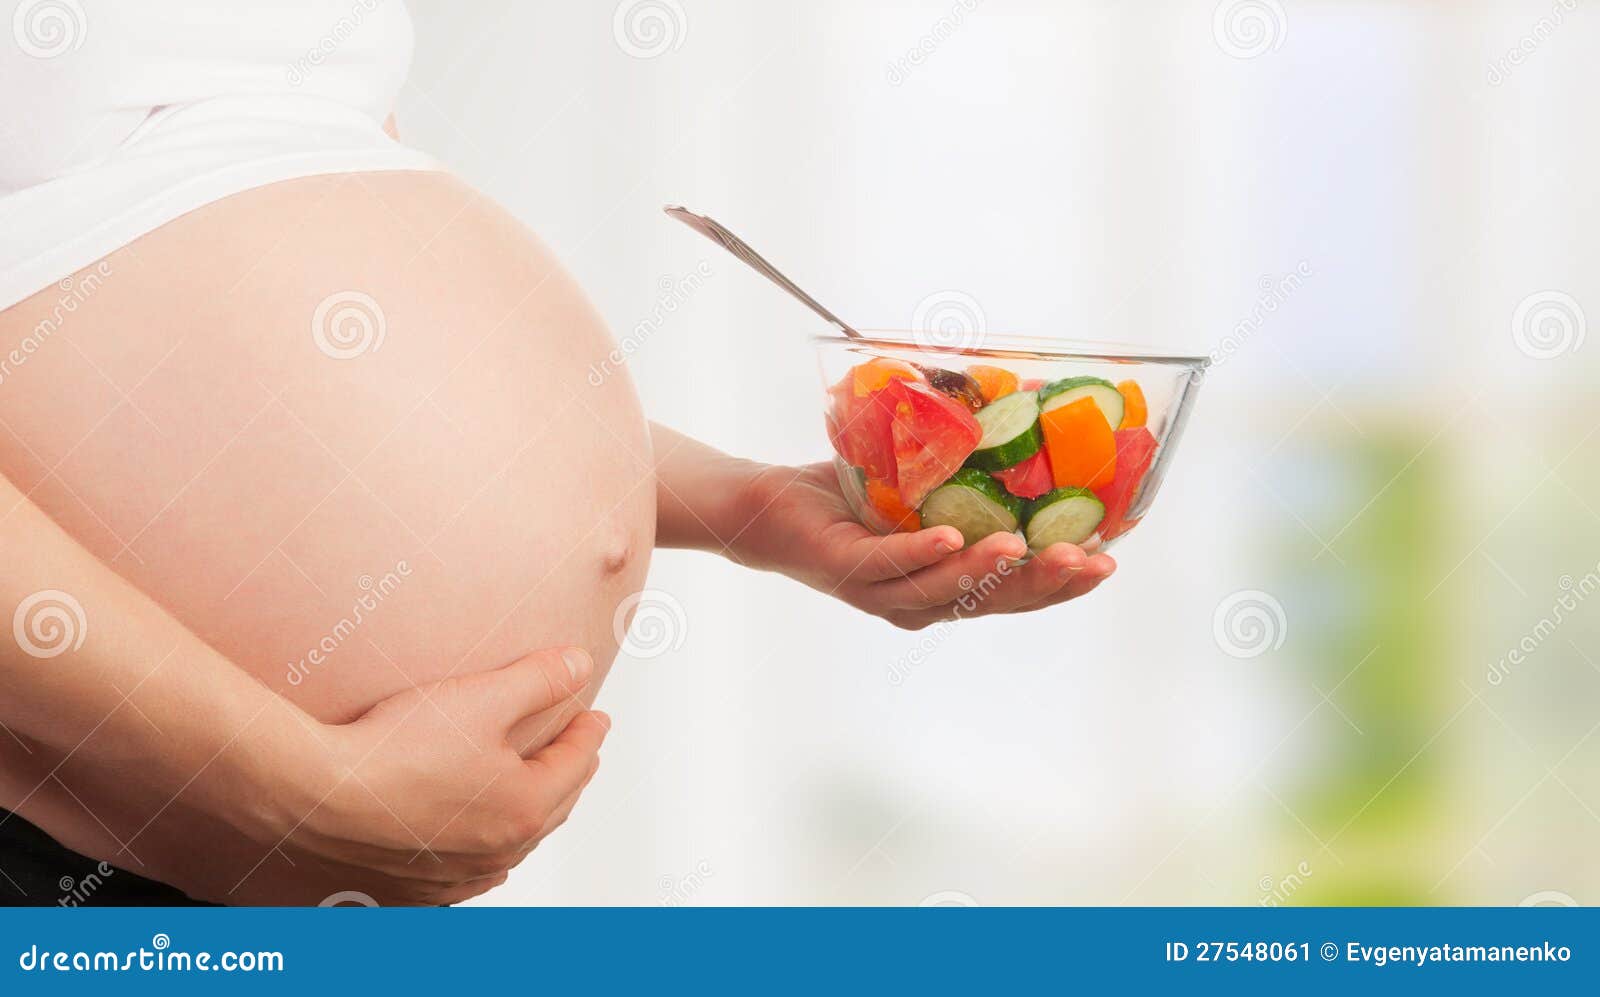 healthy nutrition and pregnancy.